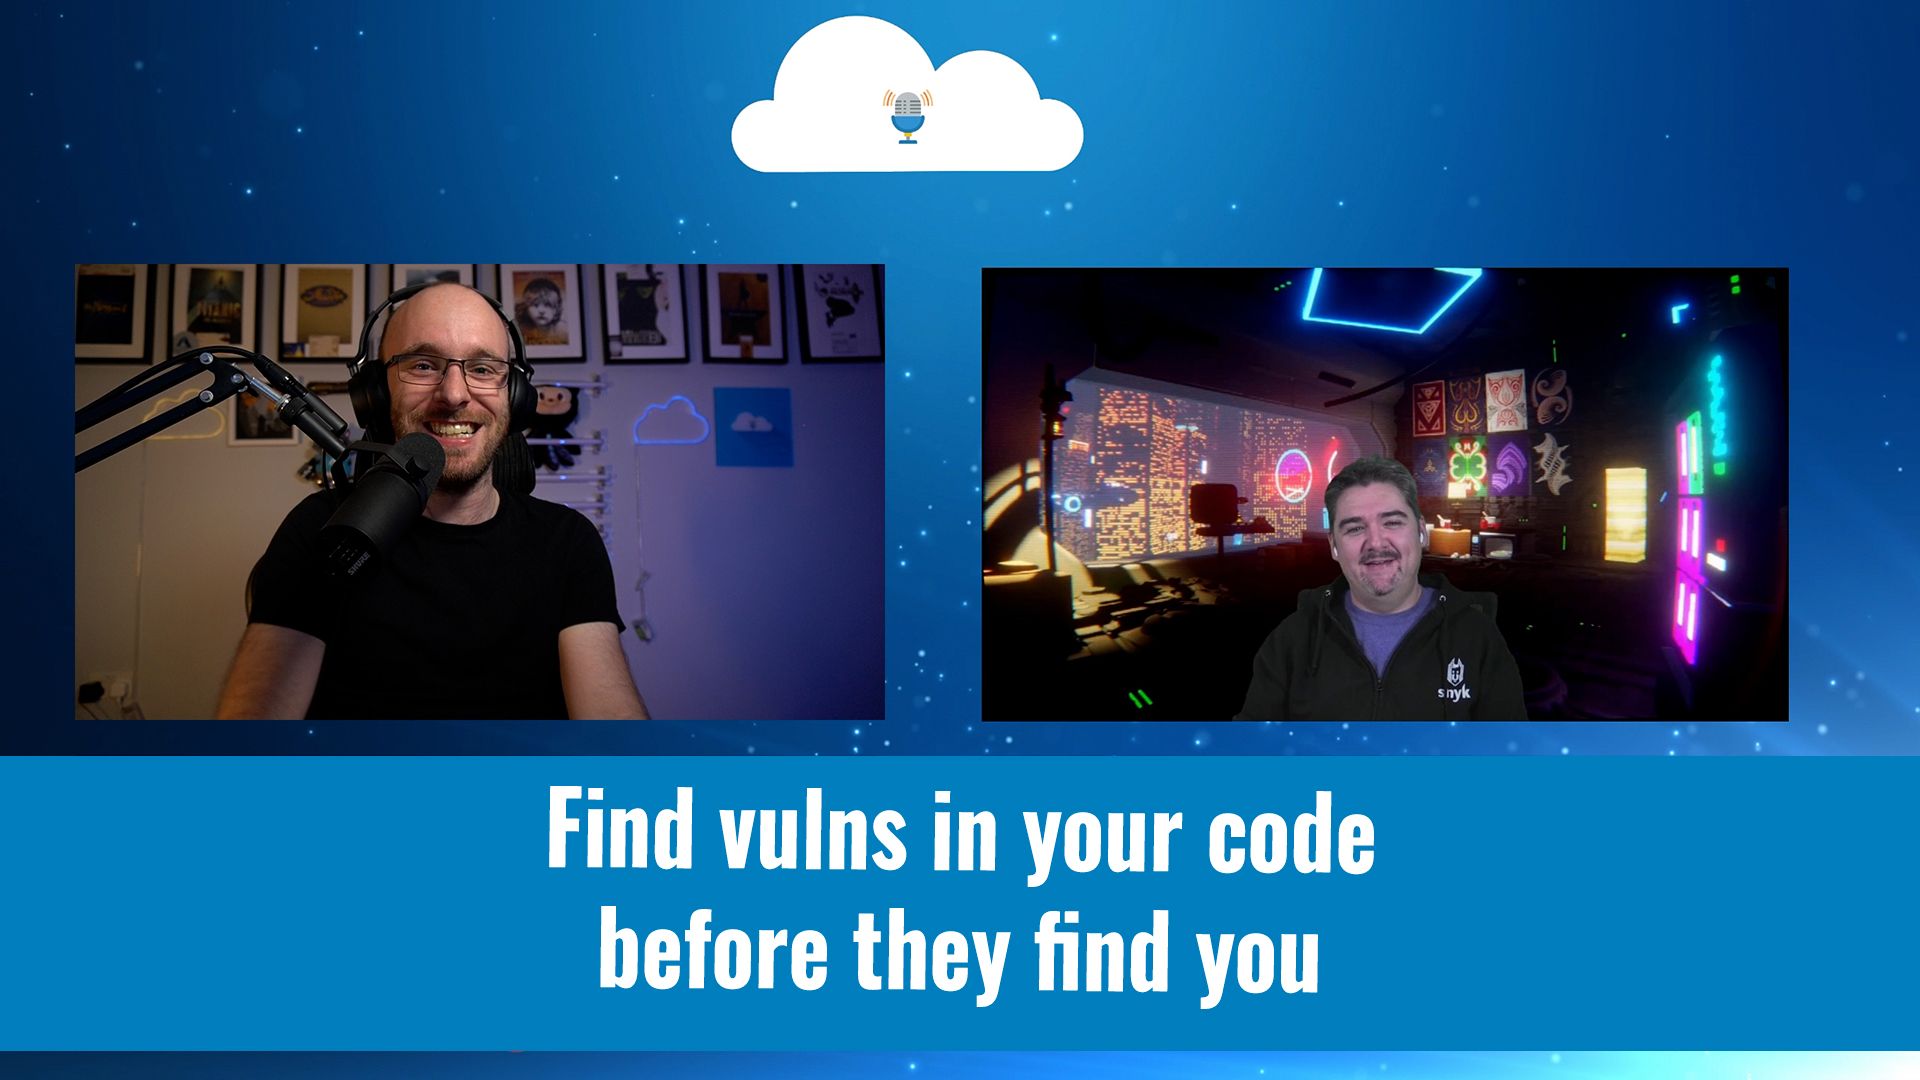 Find vulns in your code before they find you